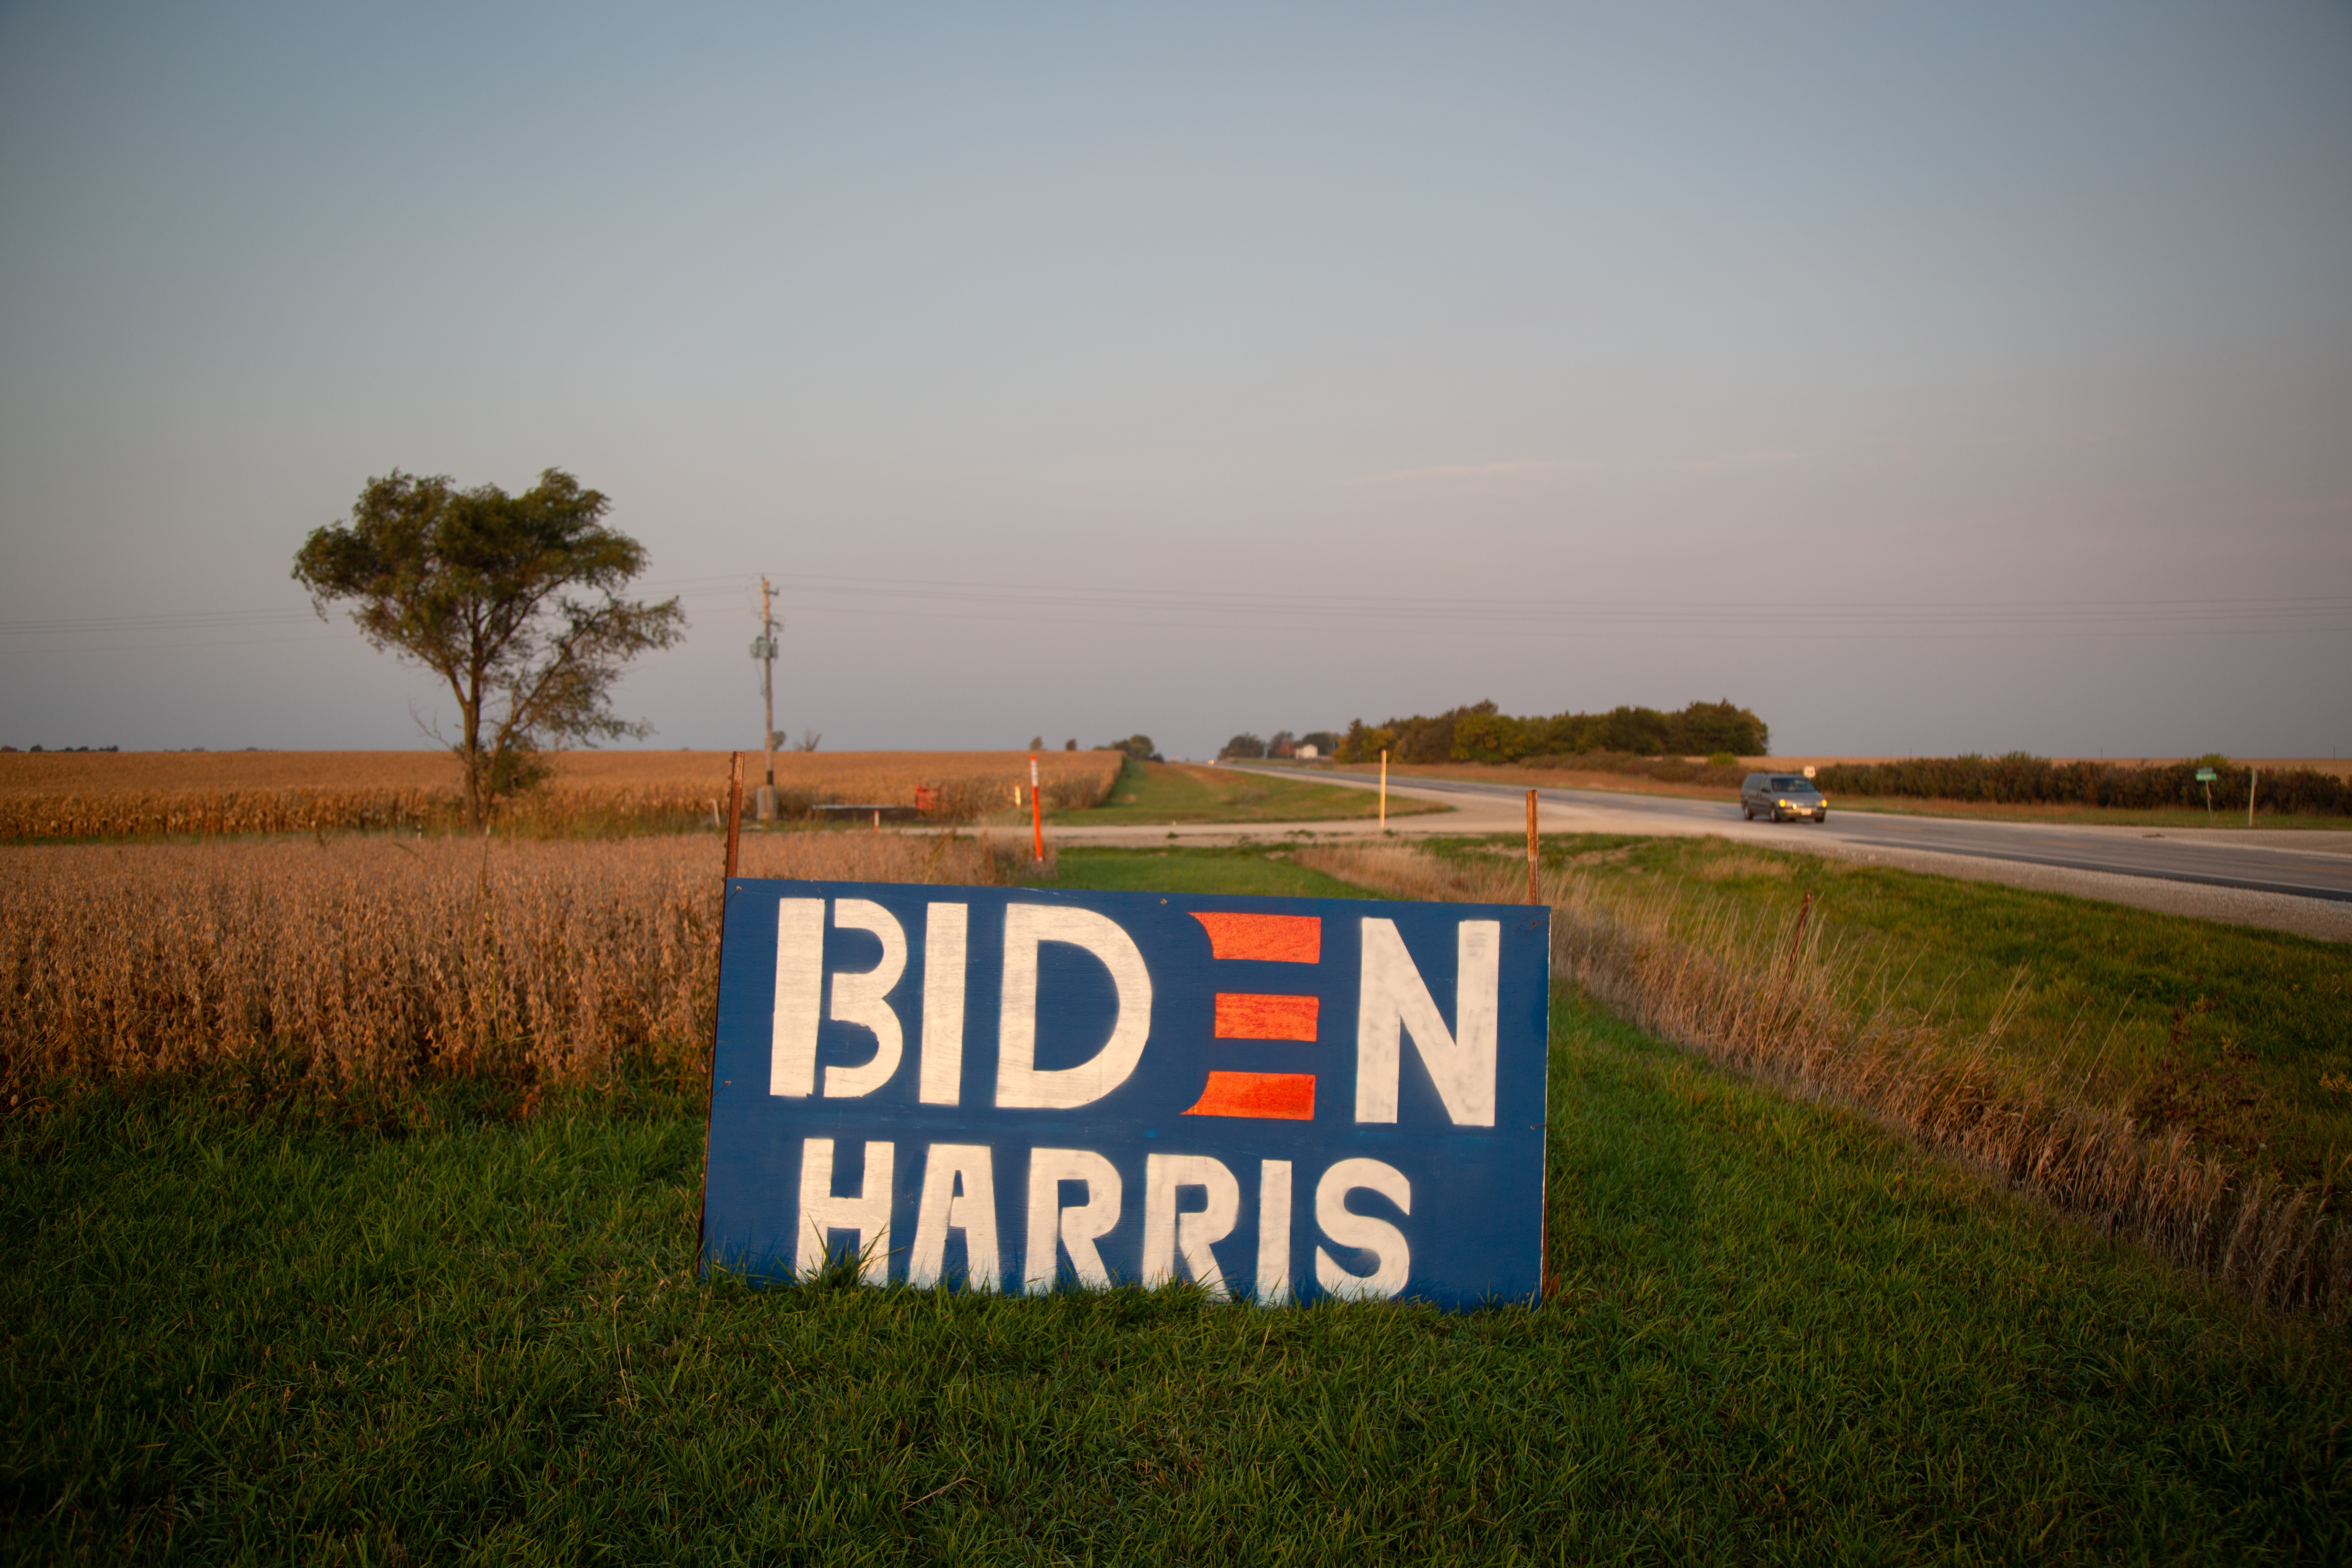 A large red and blue Biden-Harris sign sits on the side of a dirt road in Iowa, with farm fields stretching out behind it.